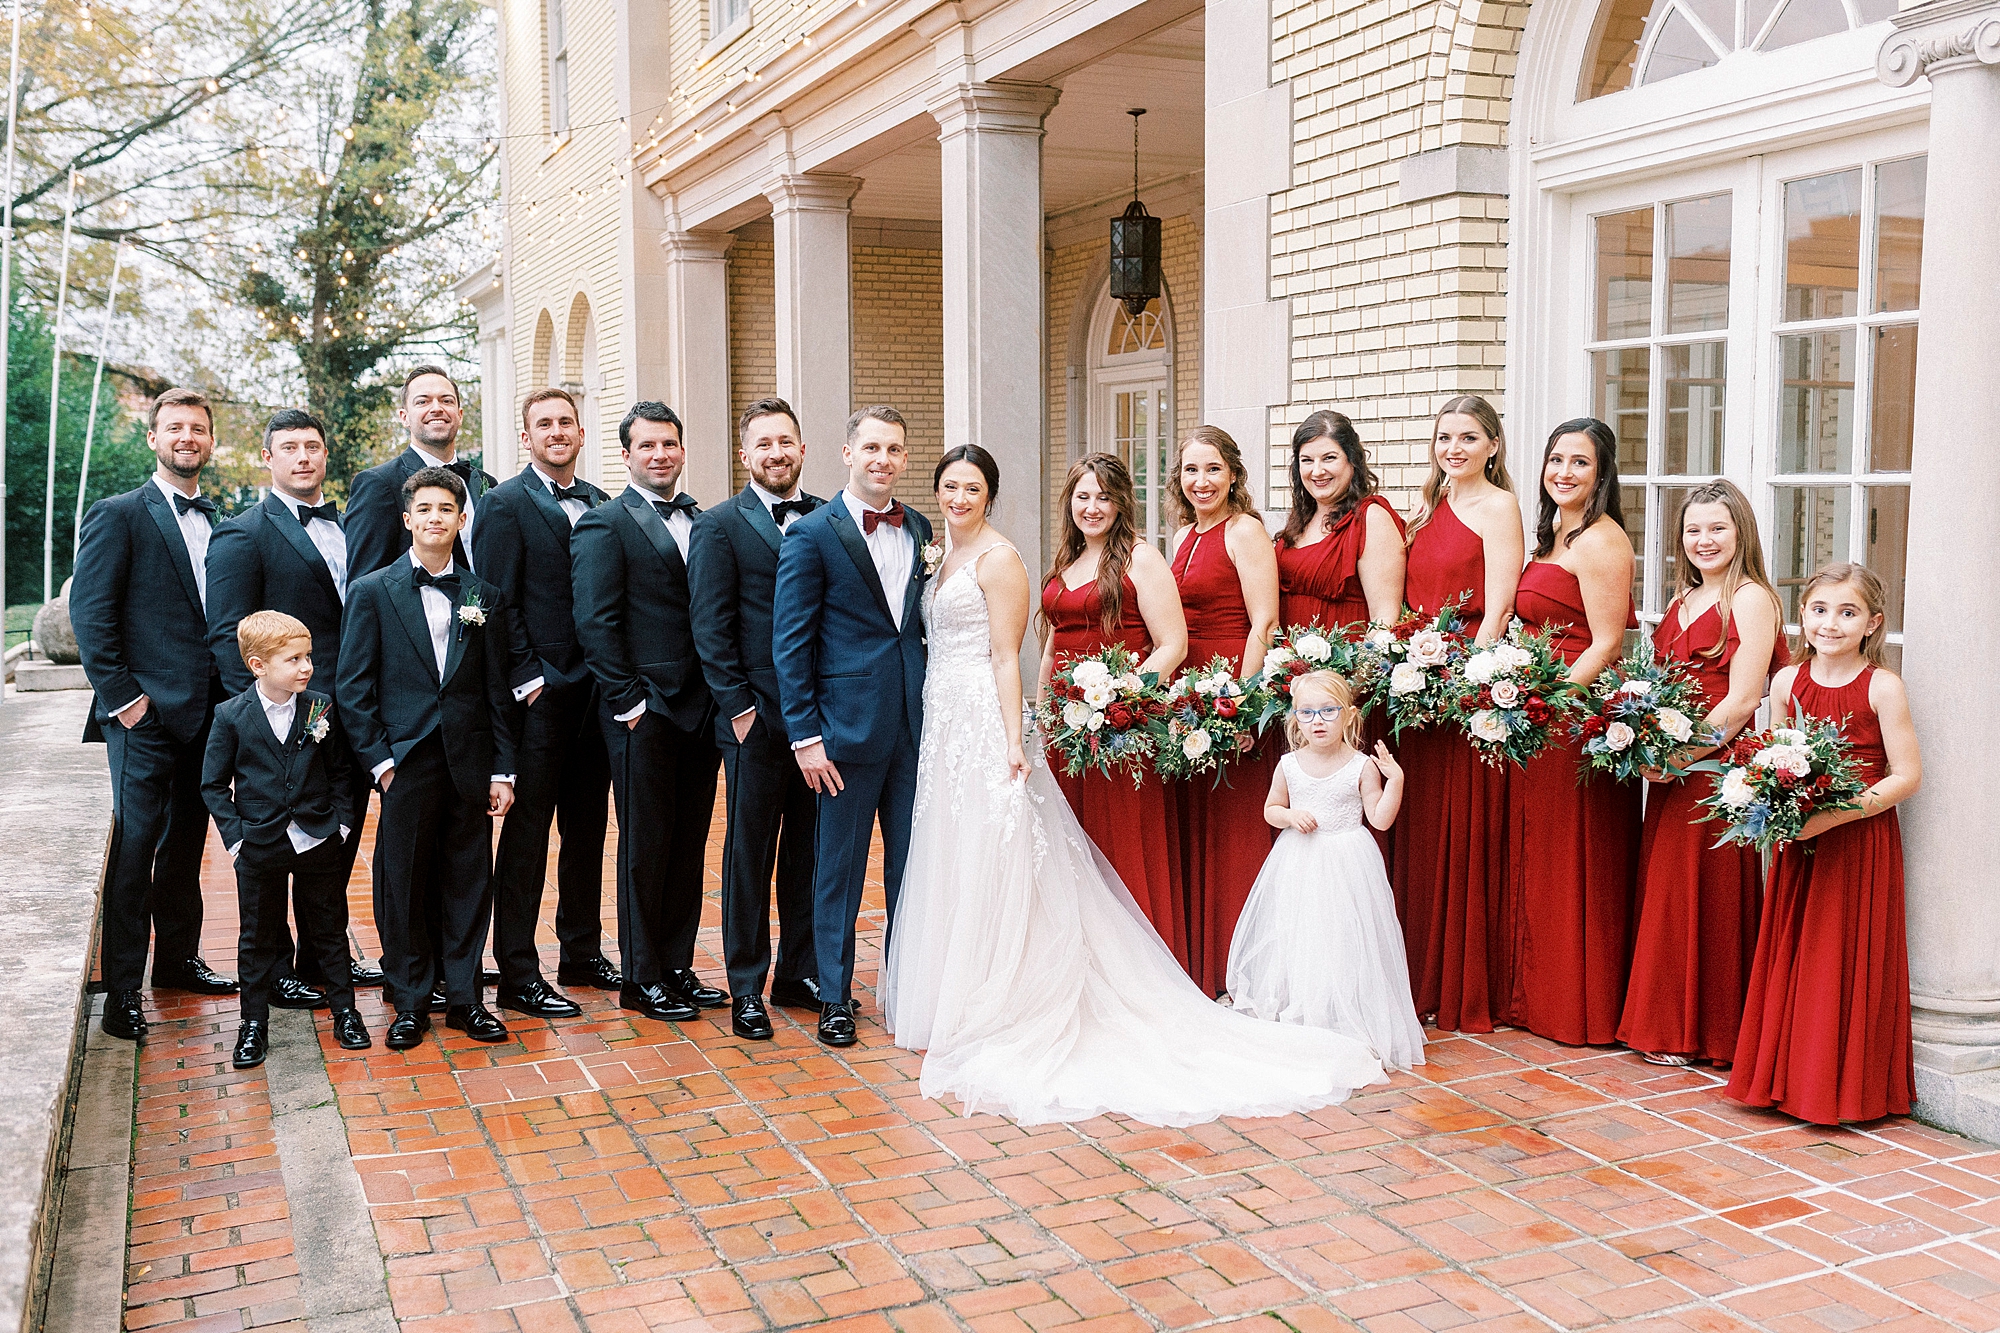 newlyweds pose with wedding party in navy suits and red gowns for classic winter wedding at Separk Mansion